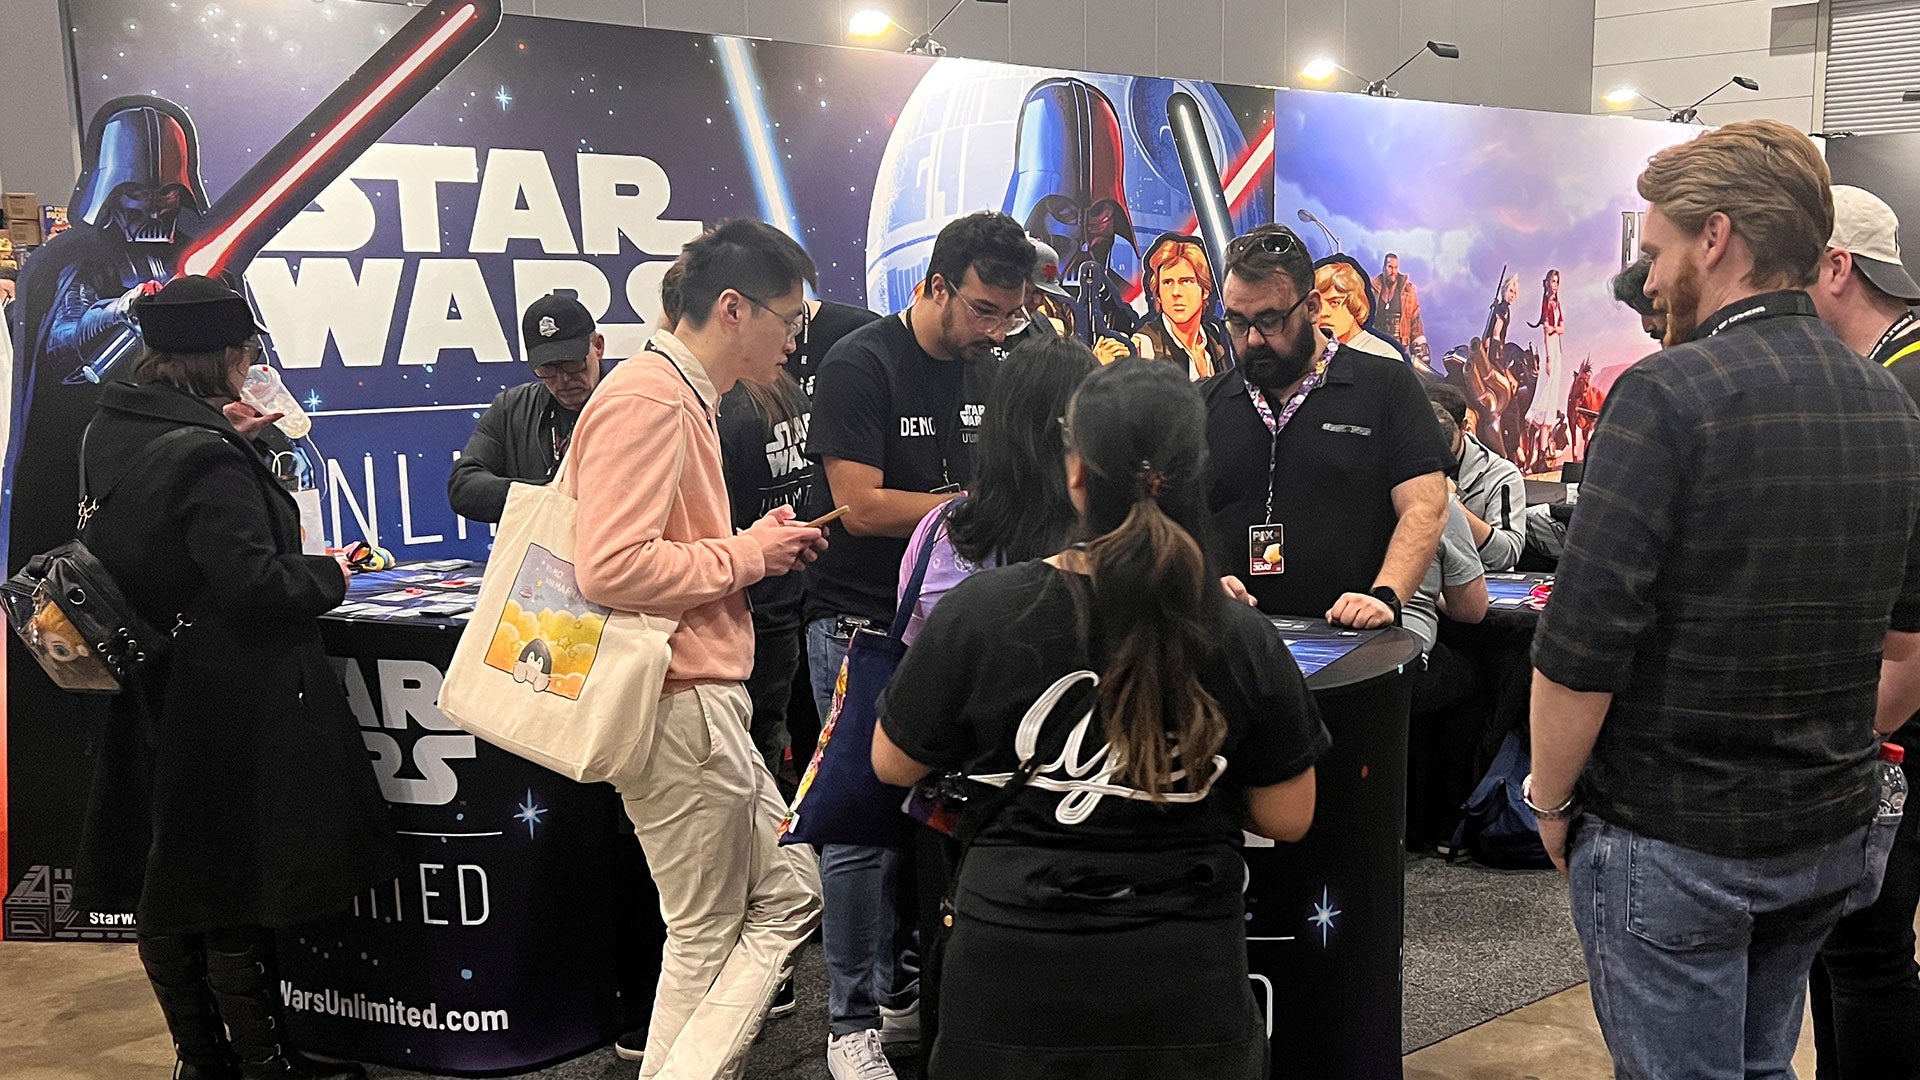 /blogs/news/hands-on-with-a-tcg-from-far-far-away-6-thoughts-about-star-wars-unlimited-after-a-demo-at-paxaus